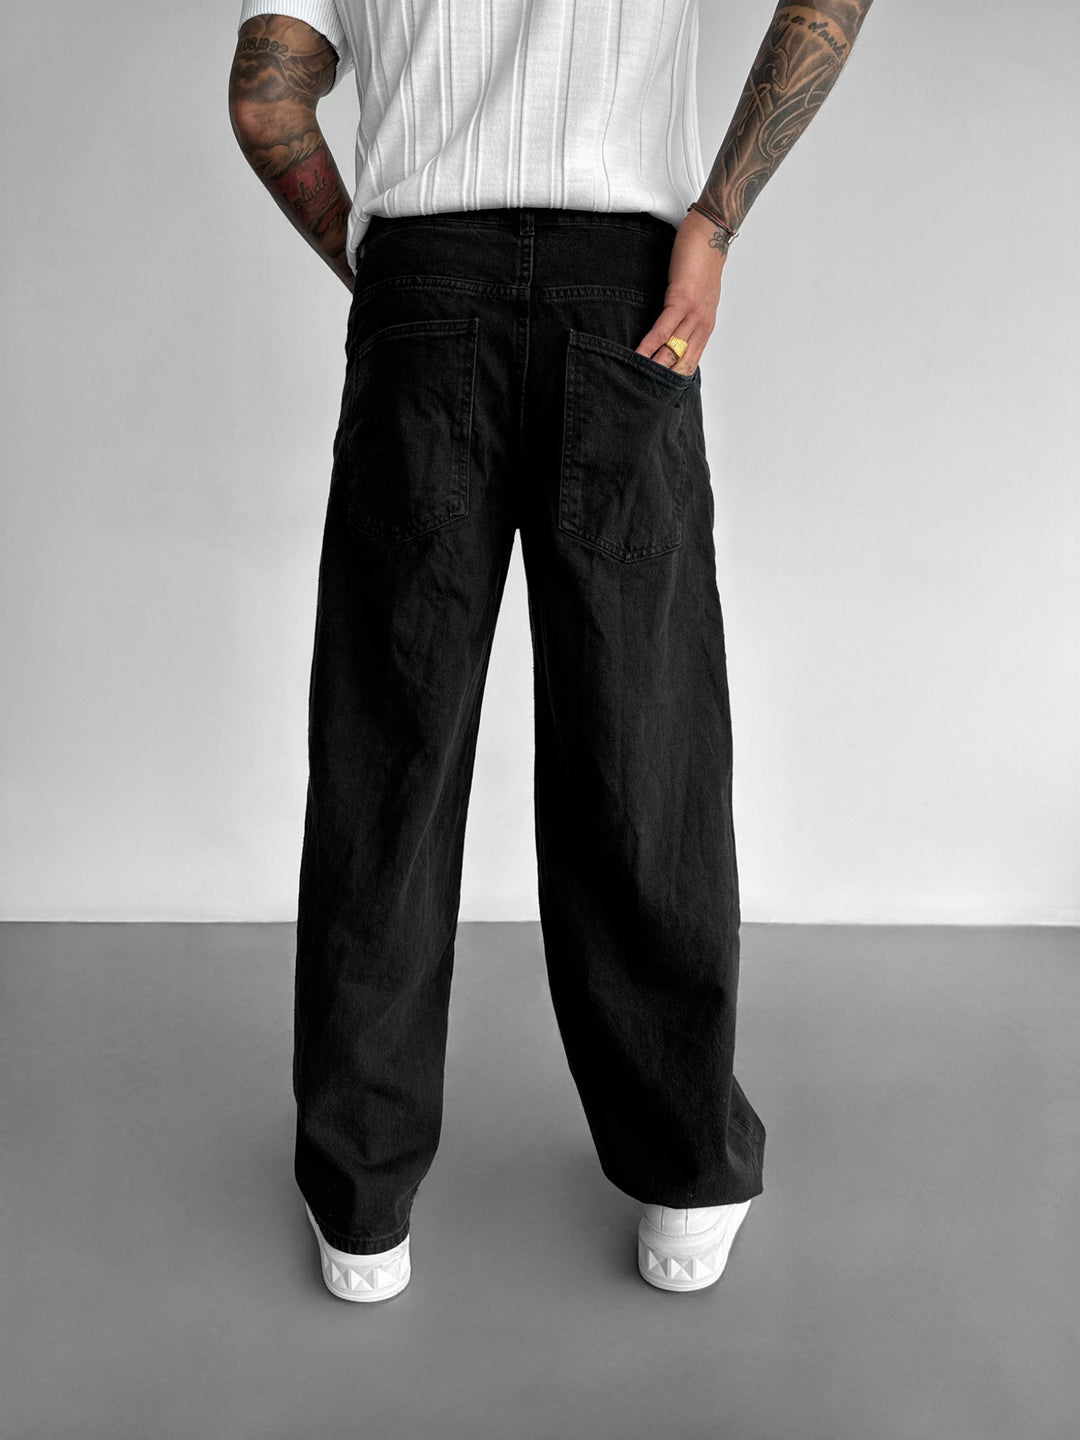 Baggy Washed Jeans - Black